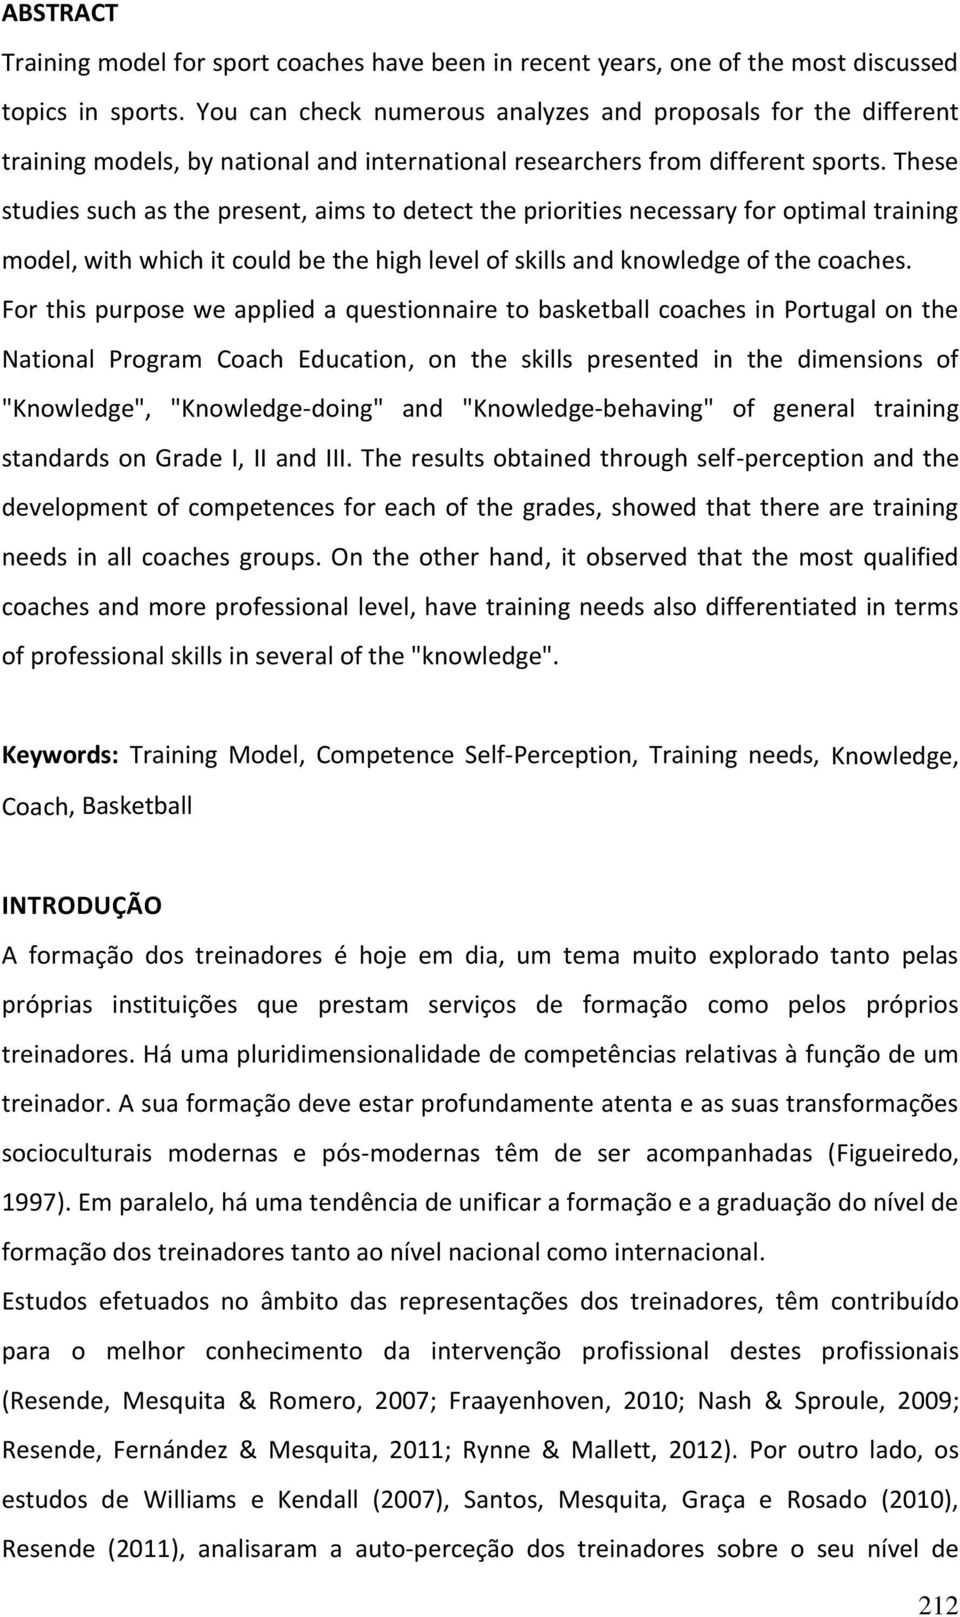 These studies such as the present, aims to detect the priorities necessary for optimal training model, with which it could be the high level of skills and knowledge of the coaches.